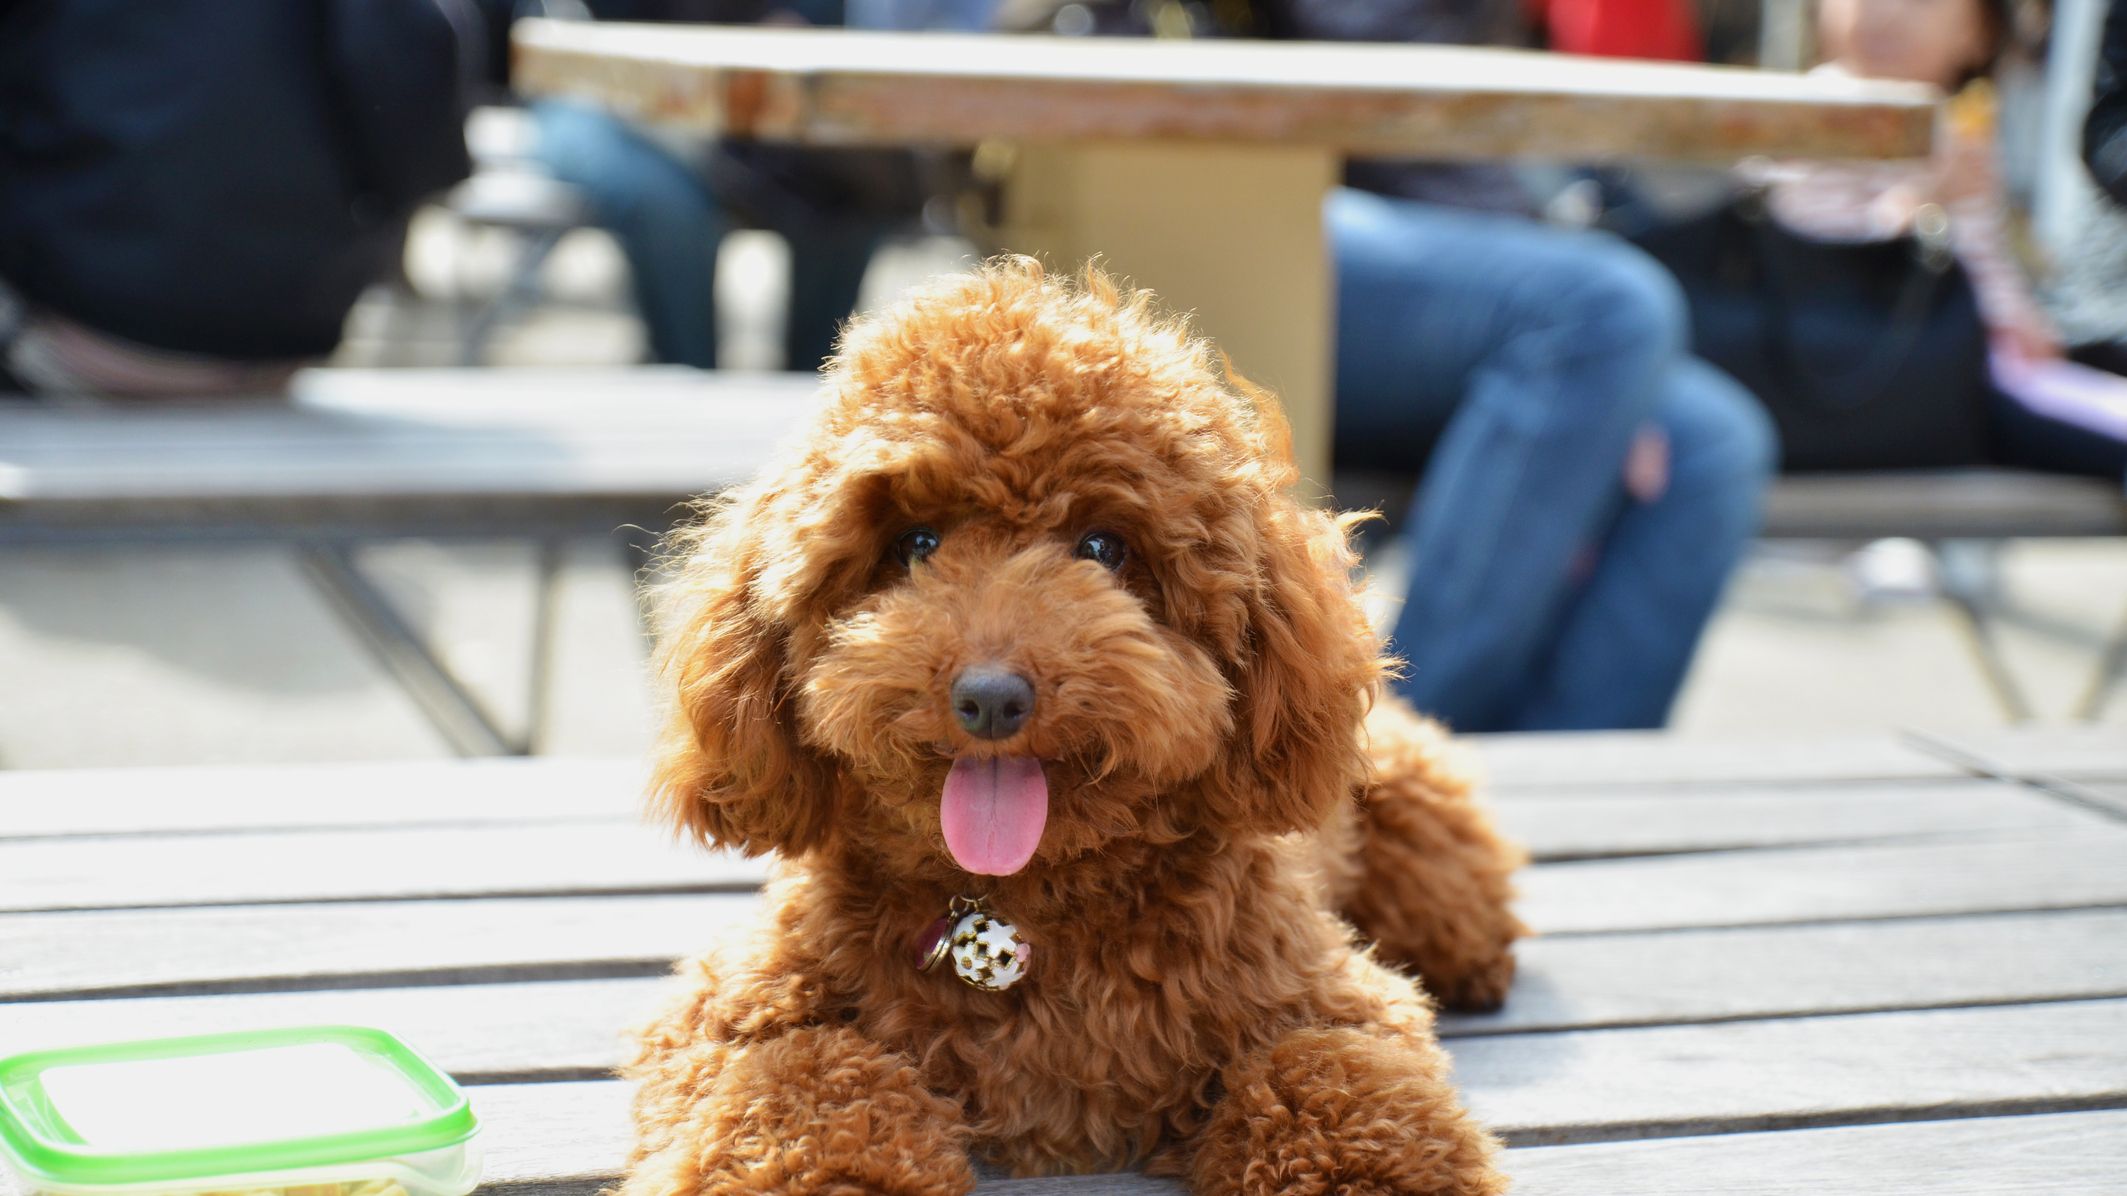 https://hips.hearstapps.com/hmg-prod/images/small-dogs-toy-poodle-1563780396.jpg?crop=1xw:0.8491394606103619xh;center,top